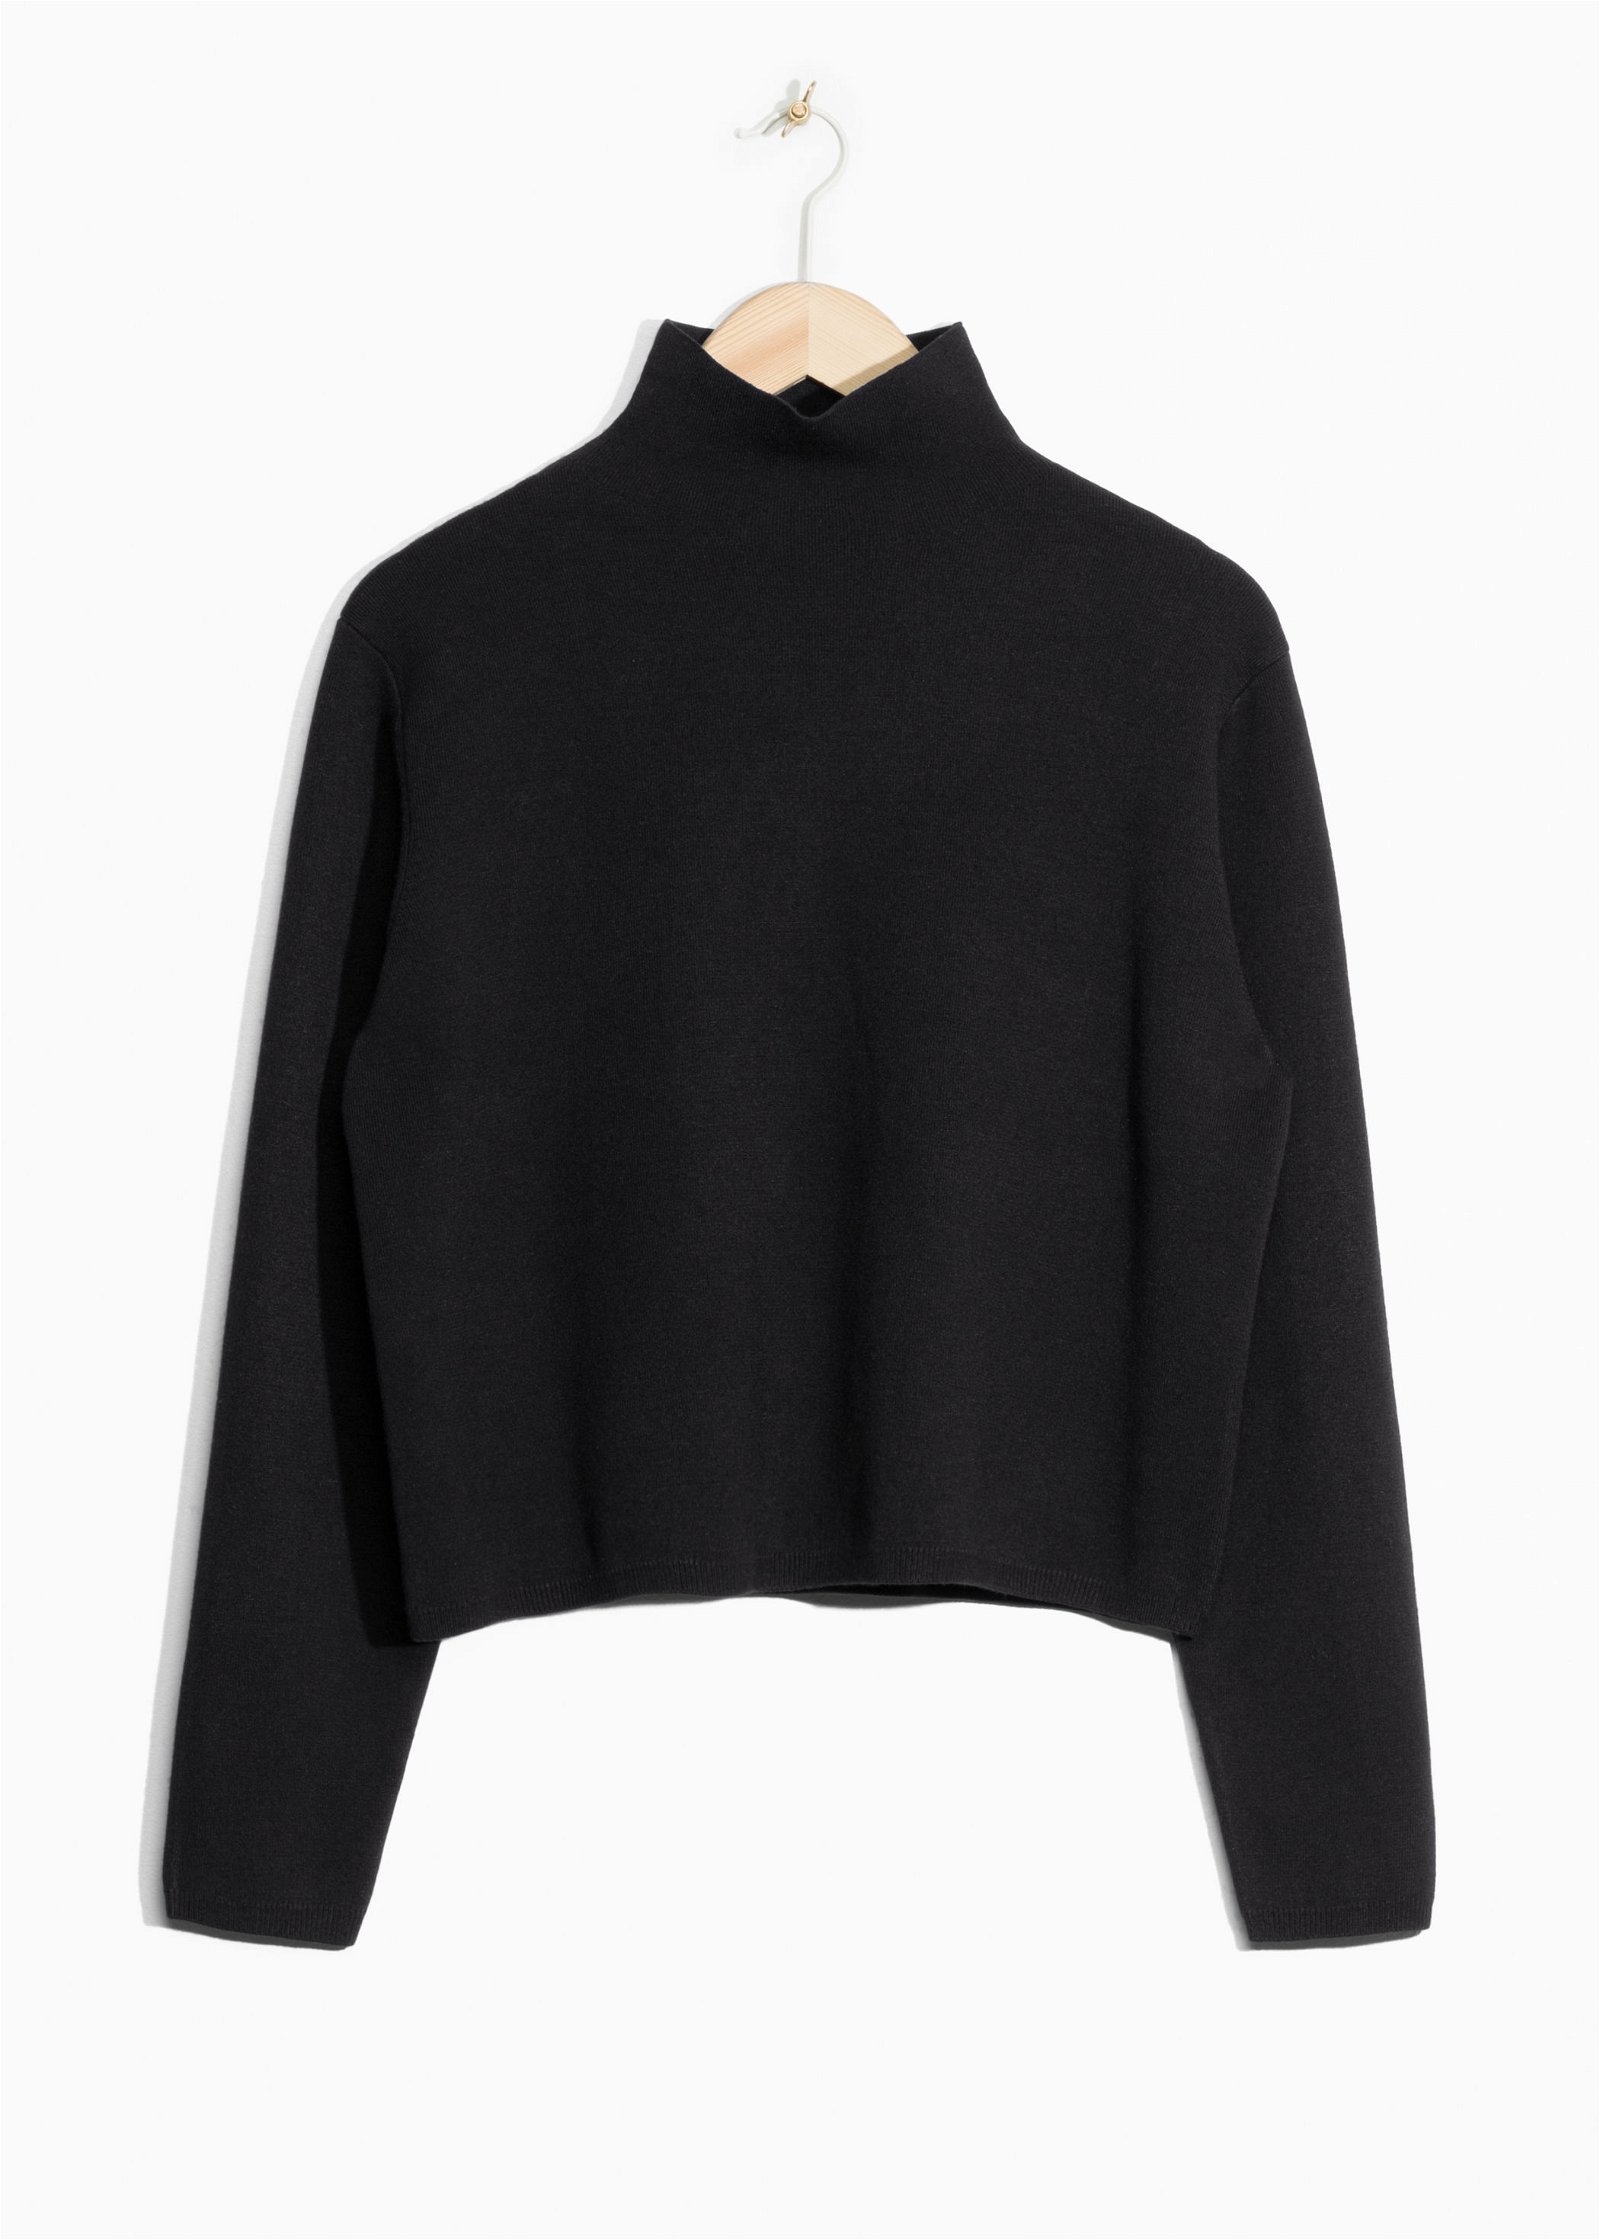 & OTHER STORIES Tight Turtleneck | Endource